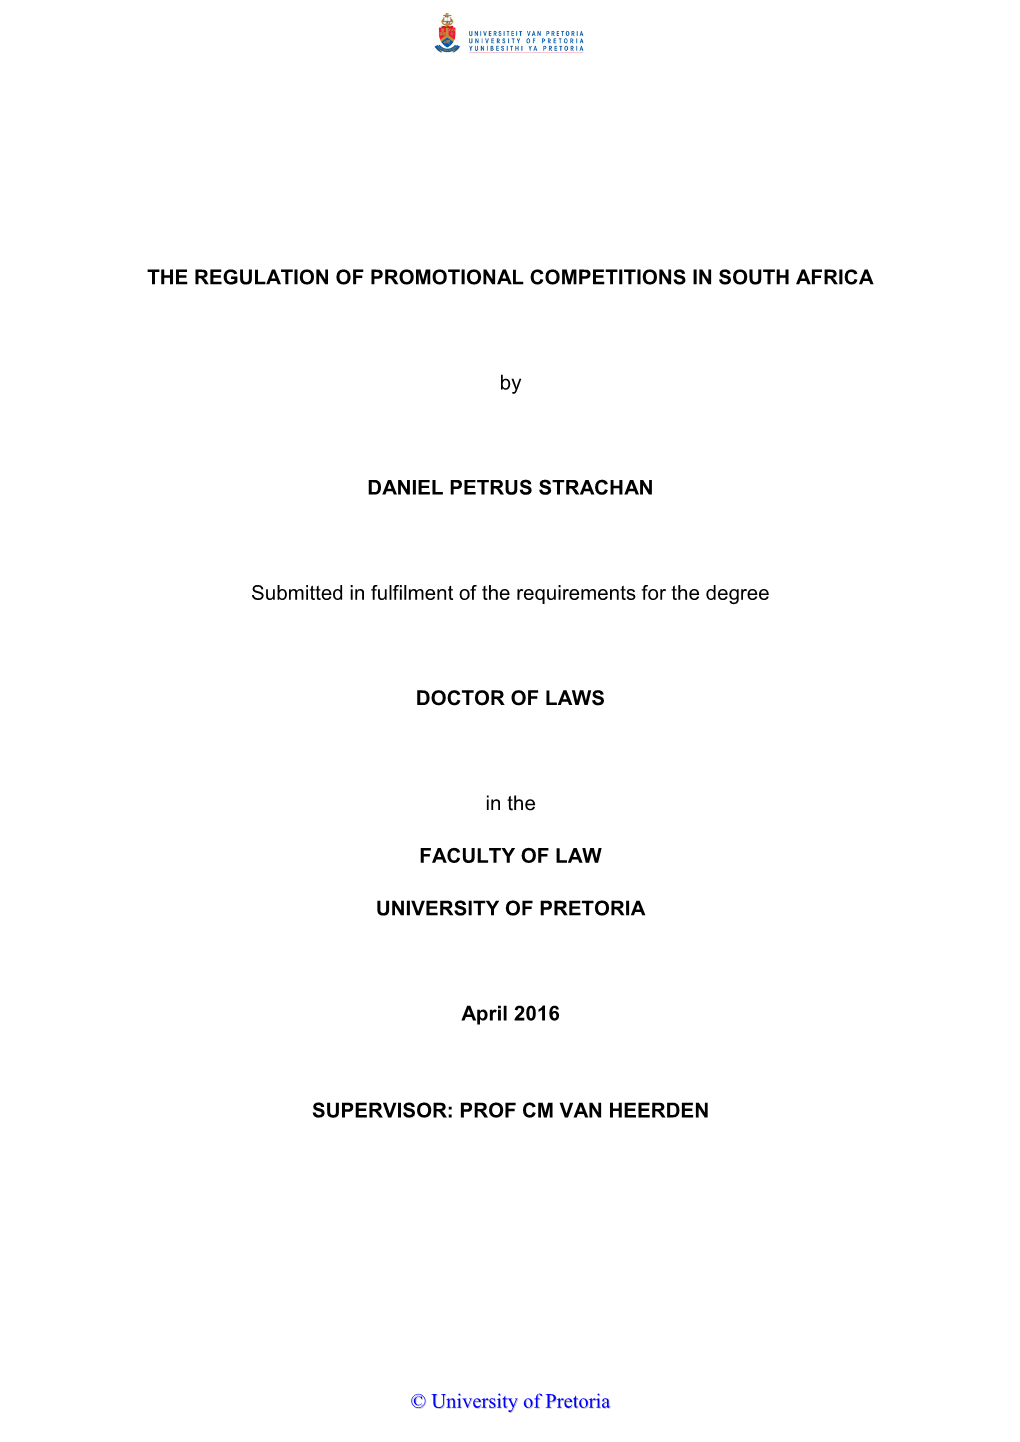 The Regulation of Promotional Competitions in South Africa